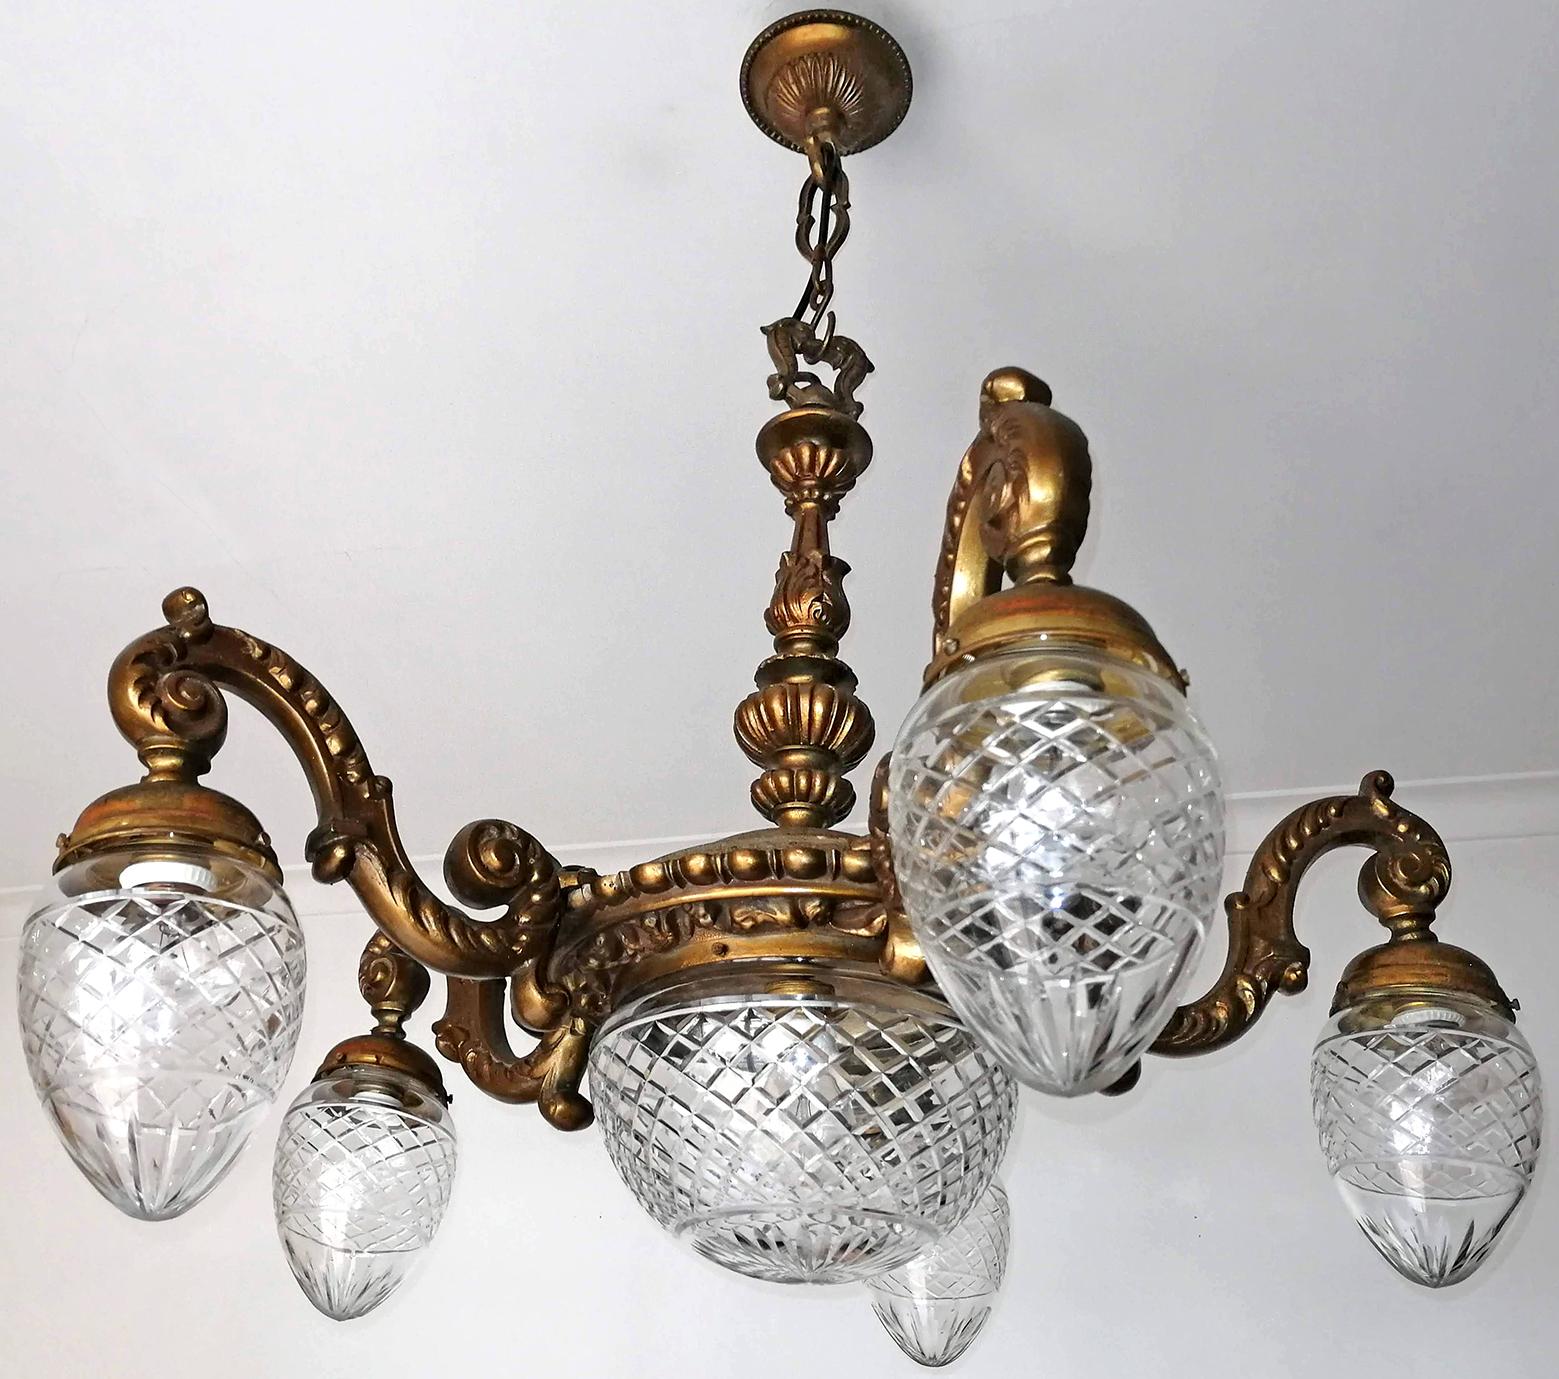 Gorgeous, heavy antique gilt bronze French Art Deco cut crystal glass globes 6-light chandelier, early 20th century.
Age patina.
Measures:
Diameter 31.5 in / 80 cm
Height 35.5 in / 90 cm
Weight 40 lb /18 kg
Glass bowl 25 x 22 cm.
Weight; 18 kg
Glass